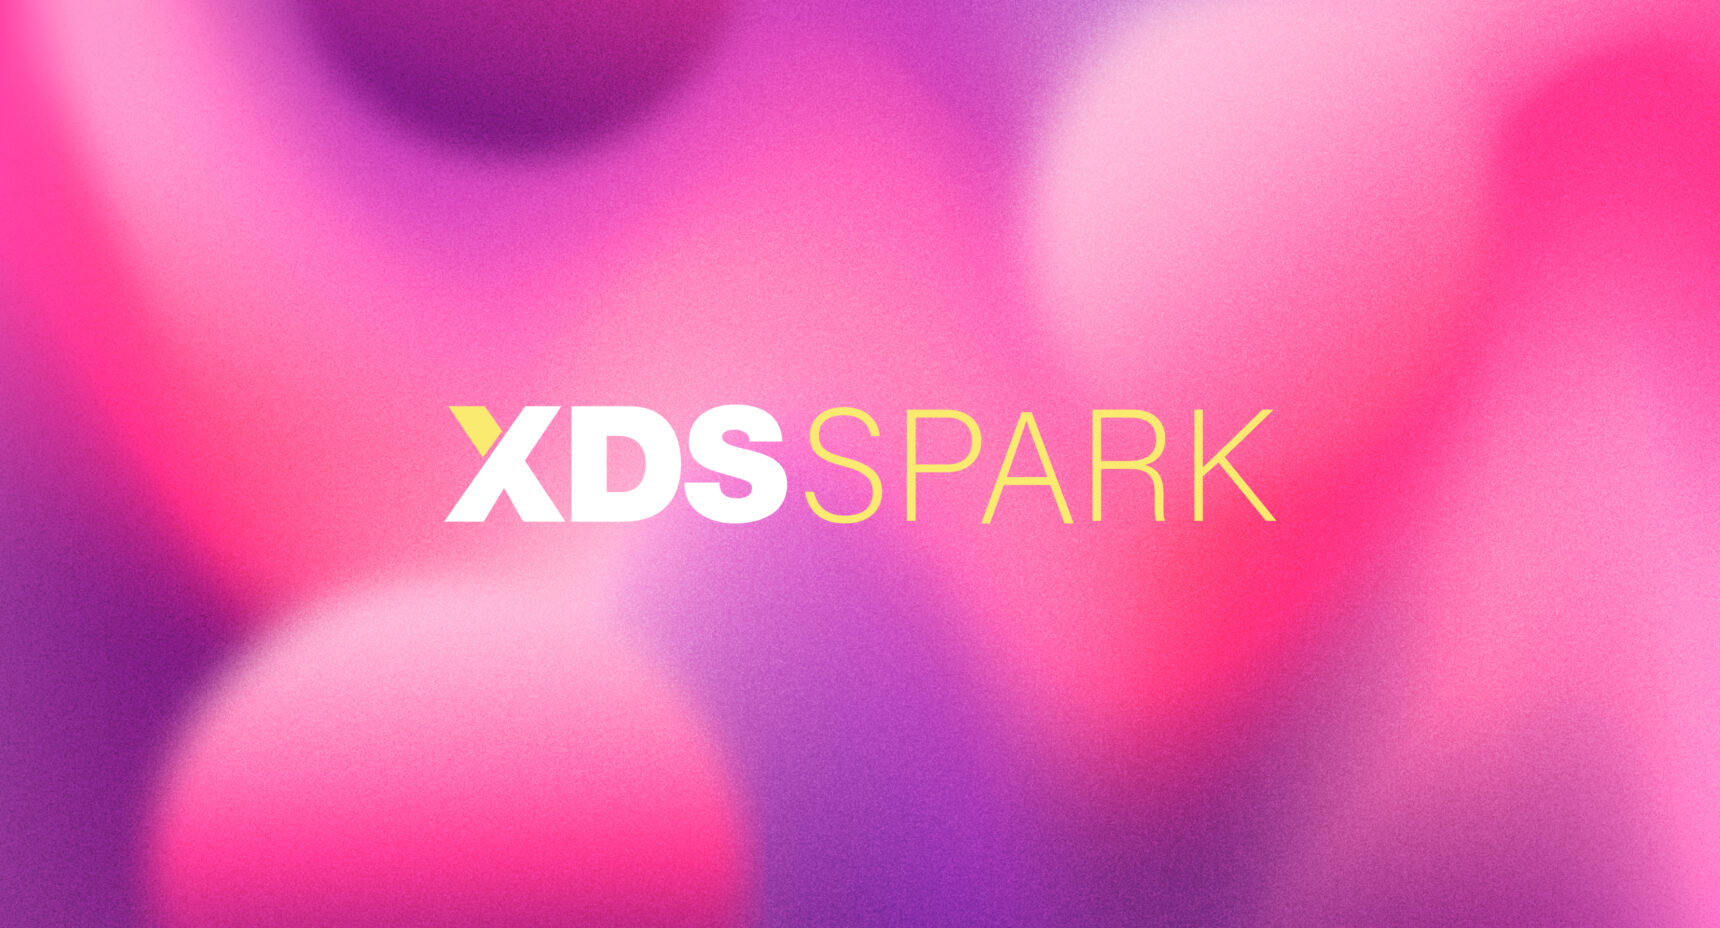 XDS Spark is Now Live with Room 8 Group as Founding Partner